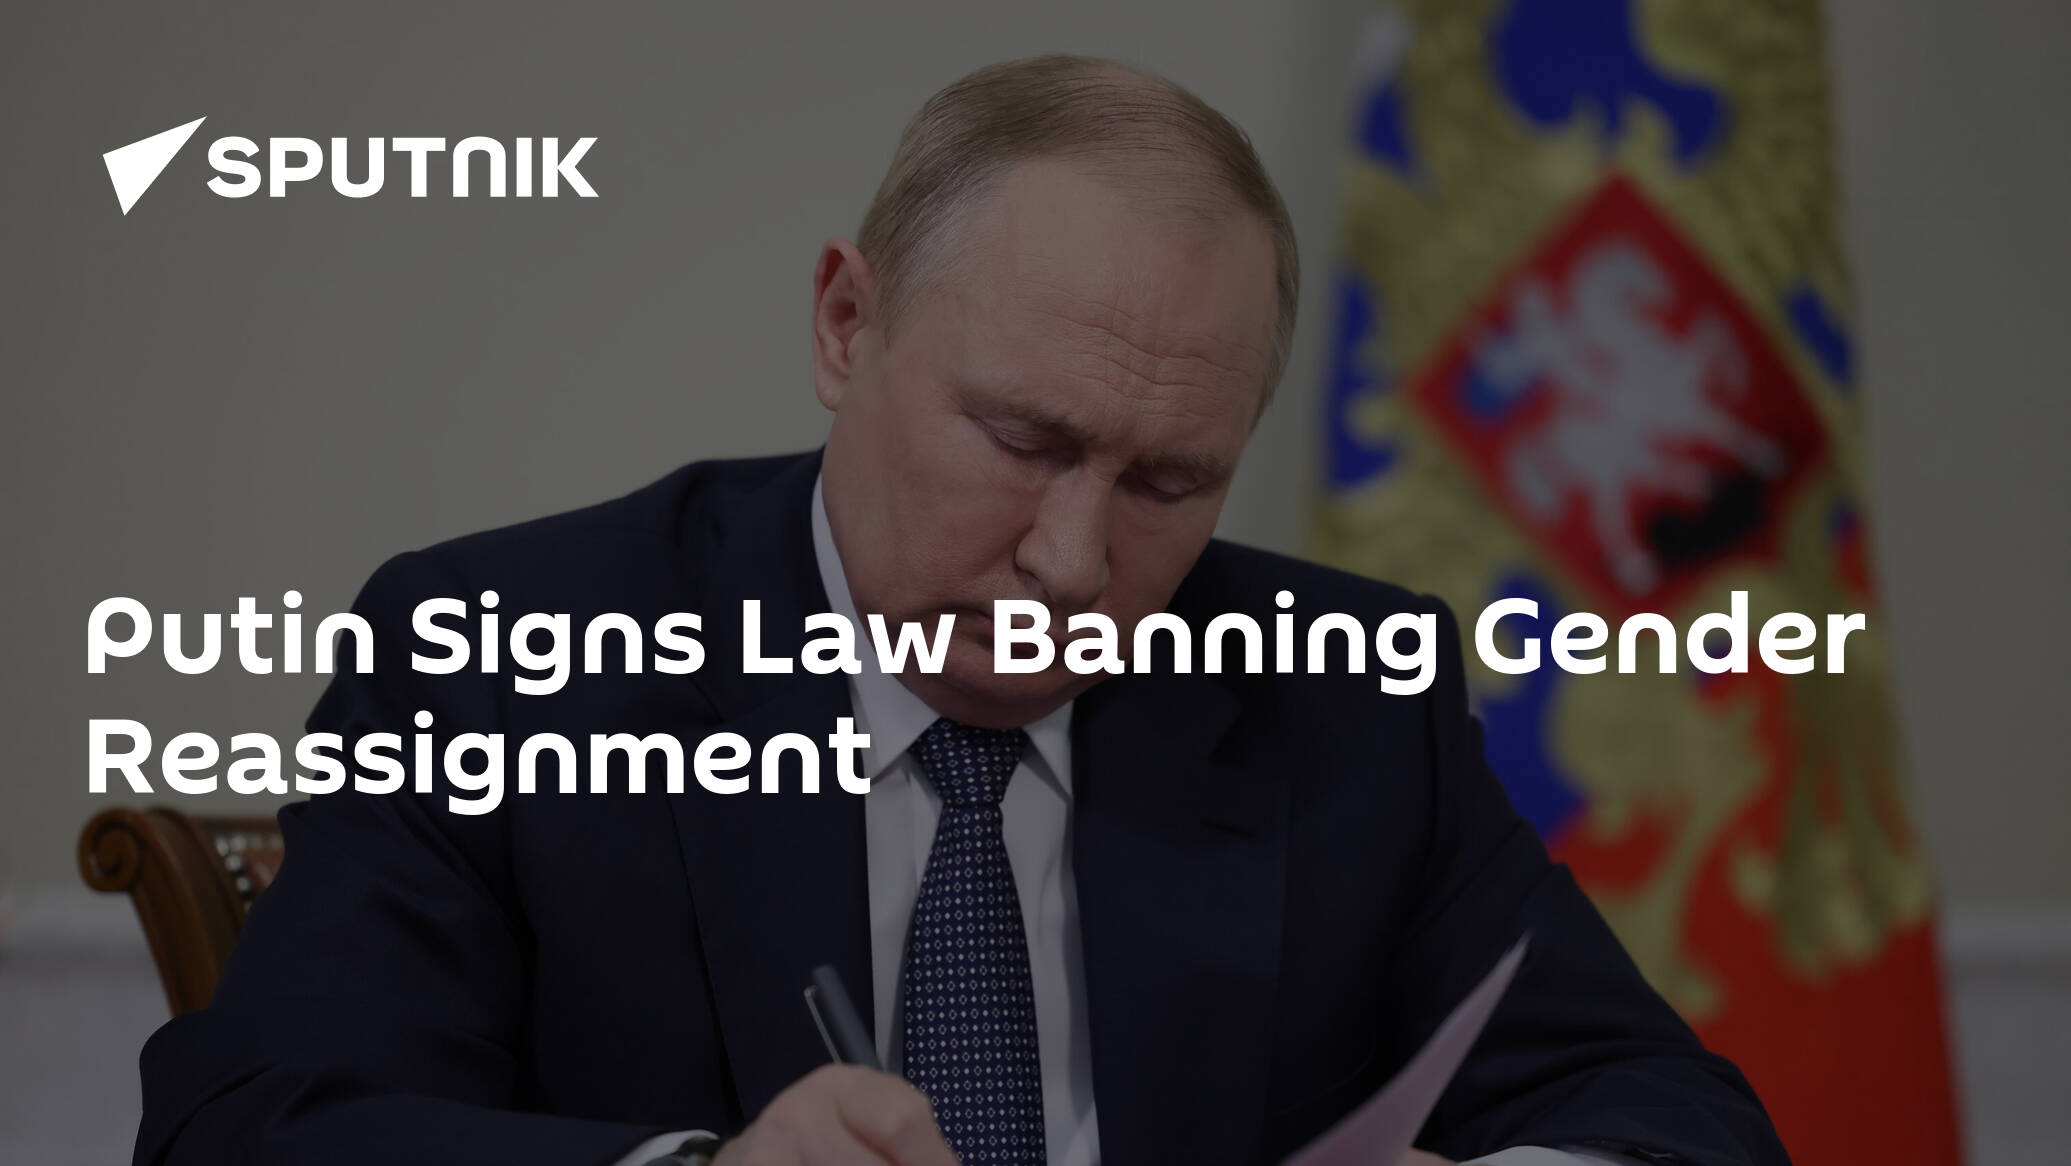 Putin Signs Law Banning Gender Reassignment South Africa Today